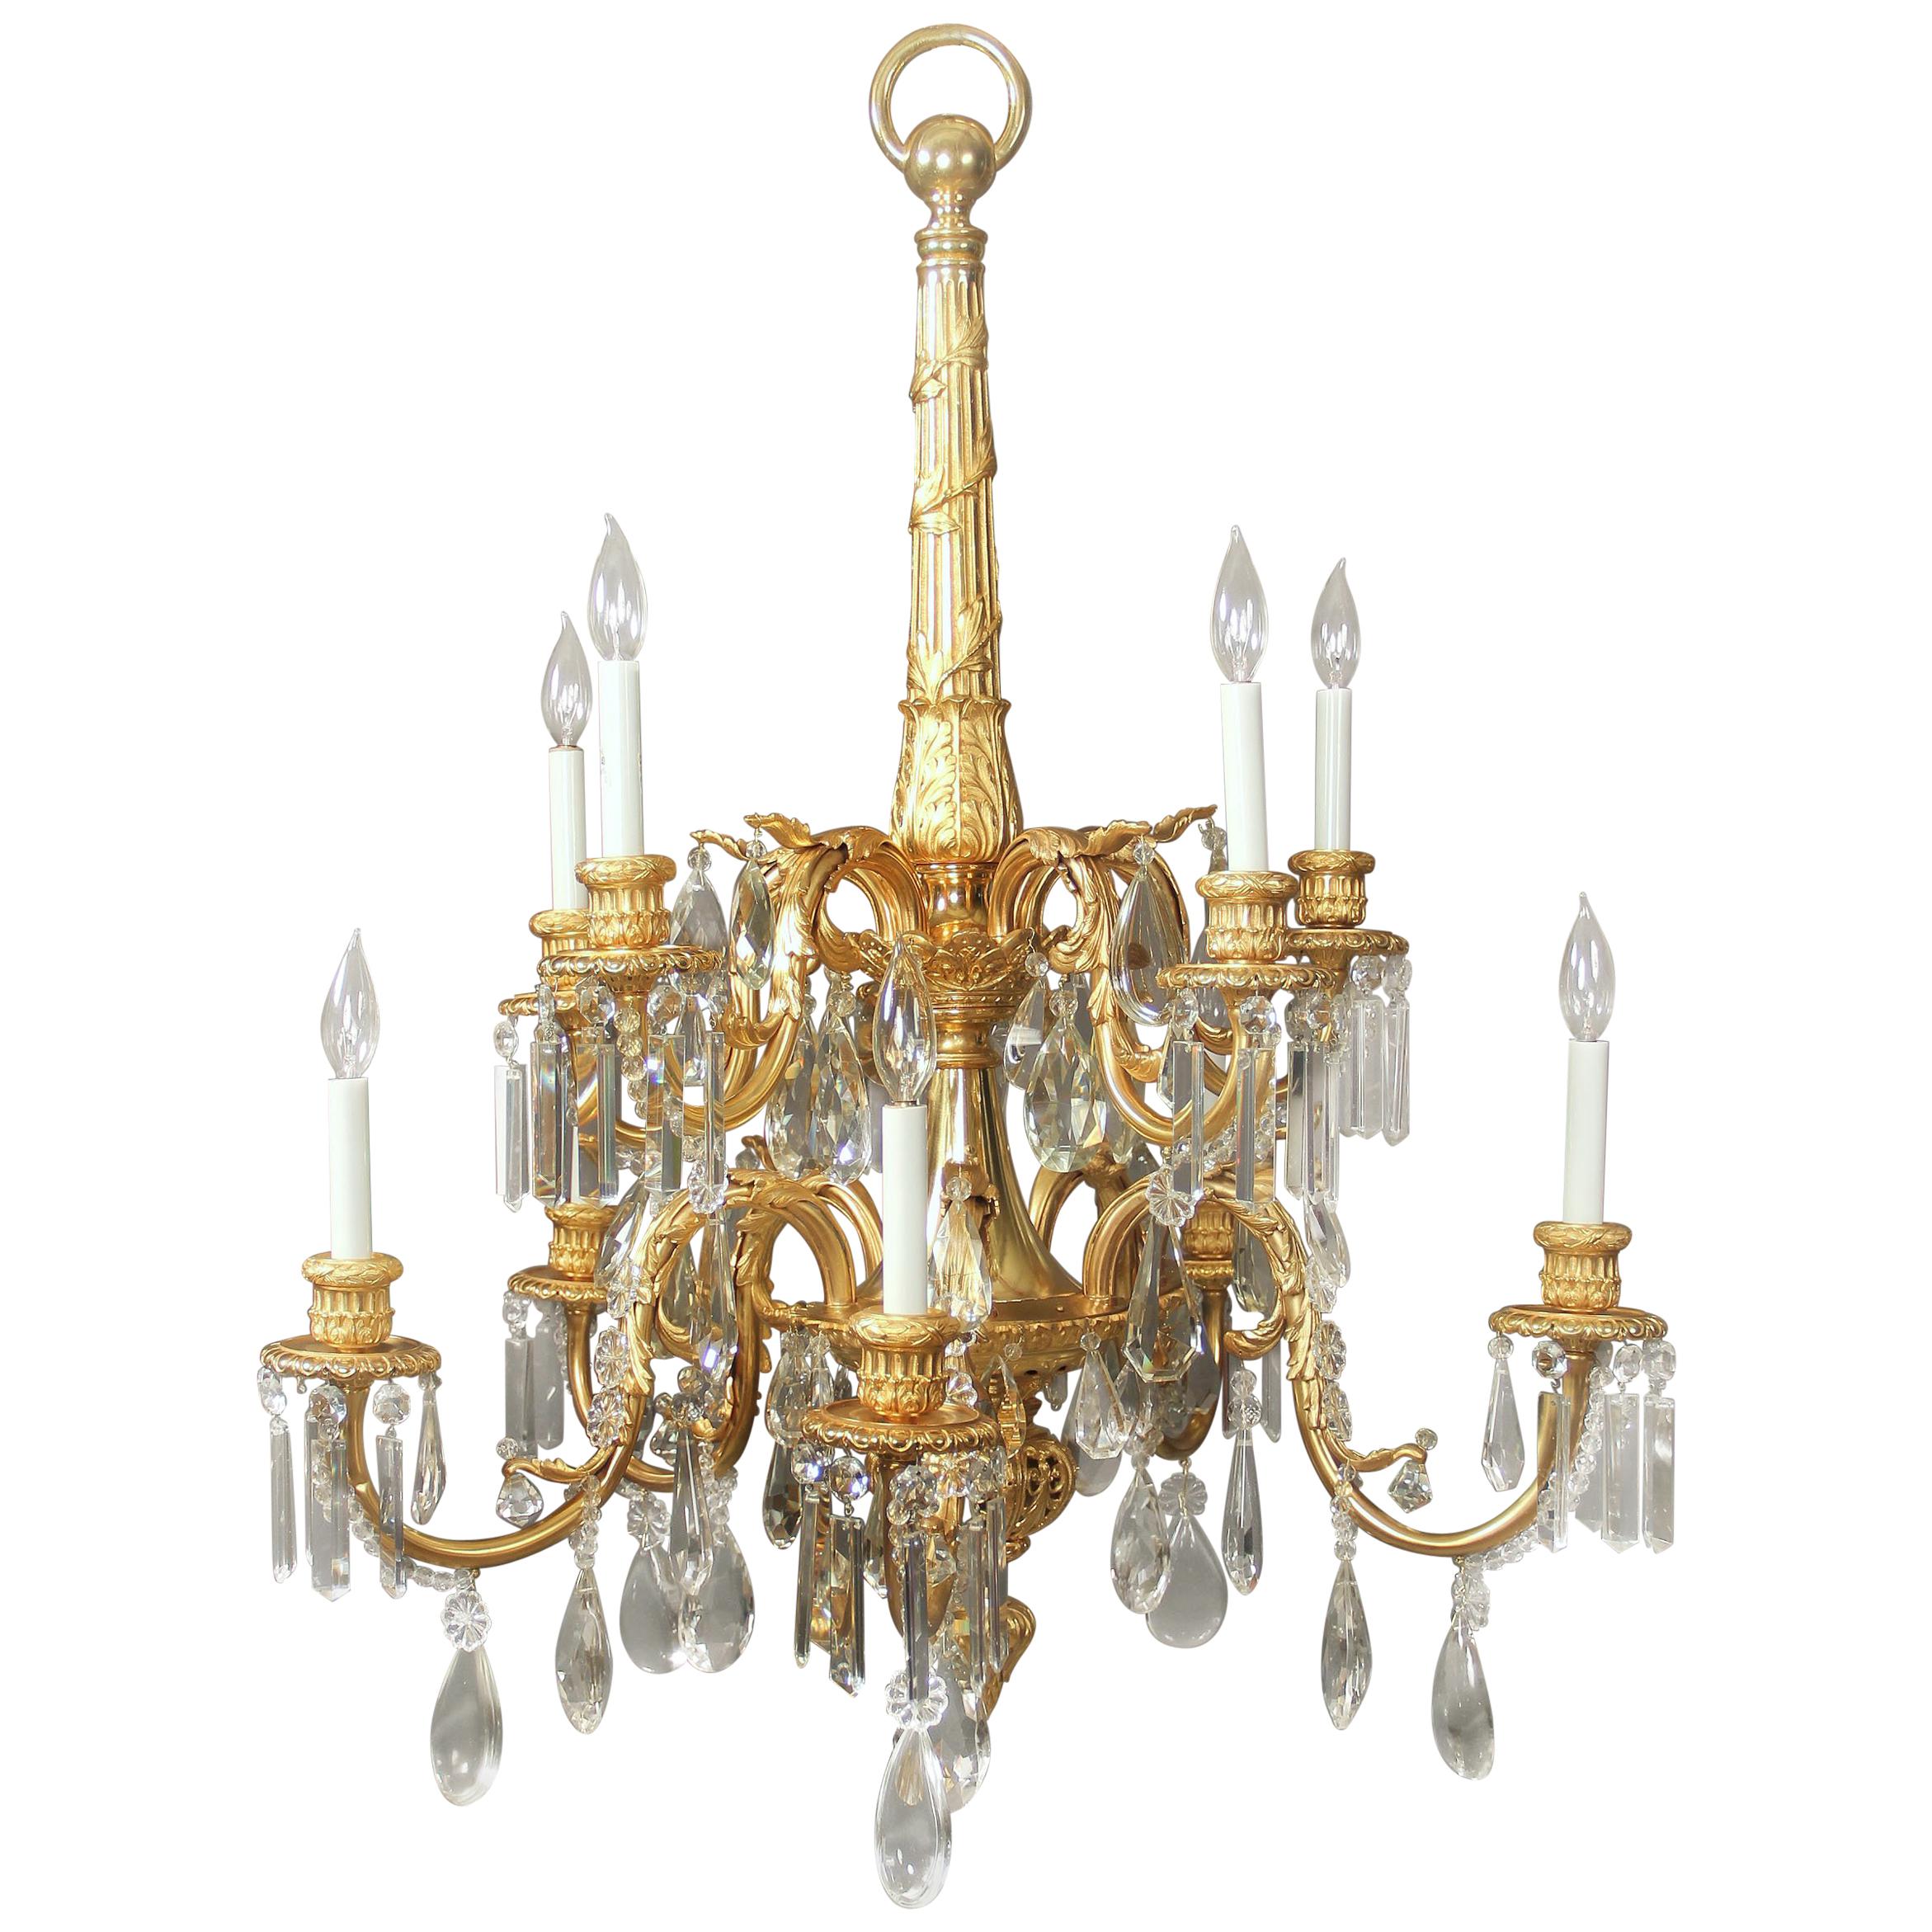 Stunning Late 19th Century Gilt Bronze and Crystal Ten-Light Chandelier For Sale